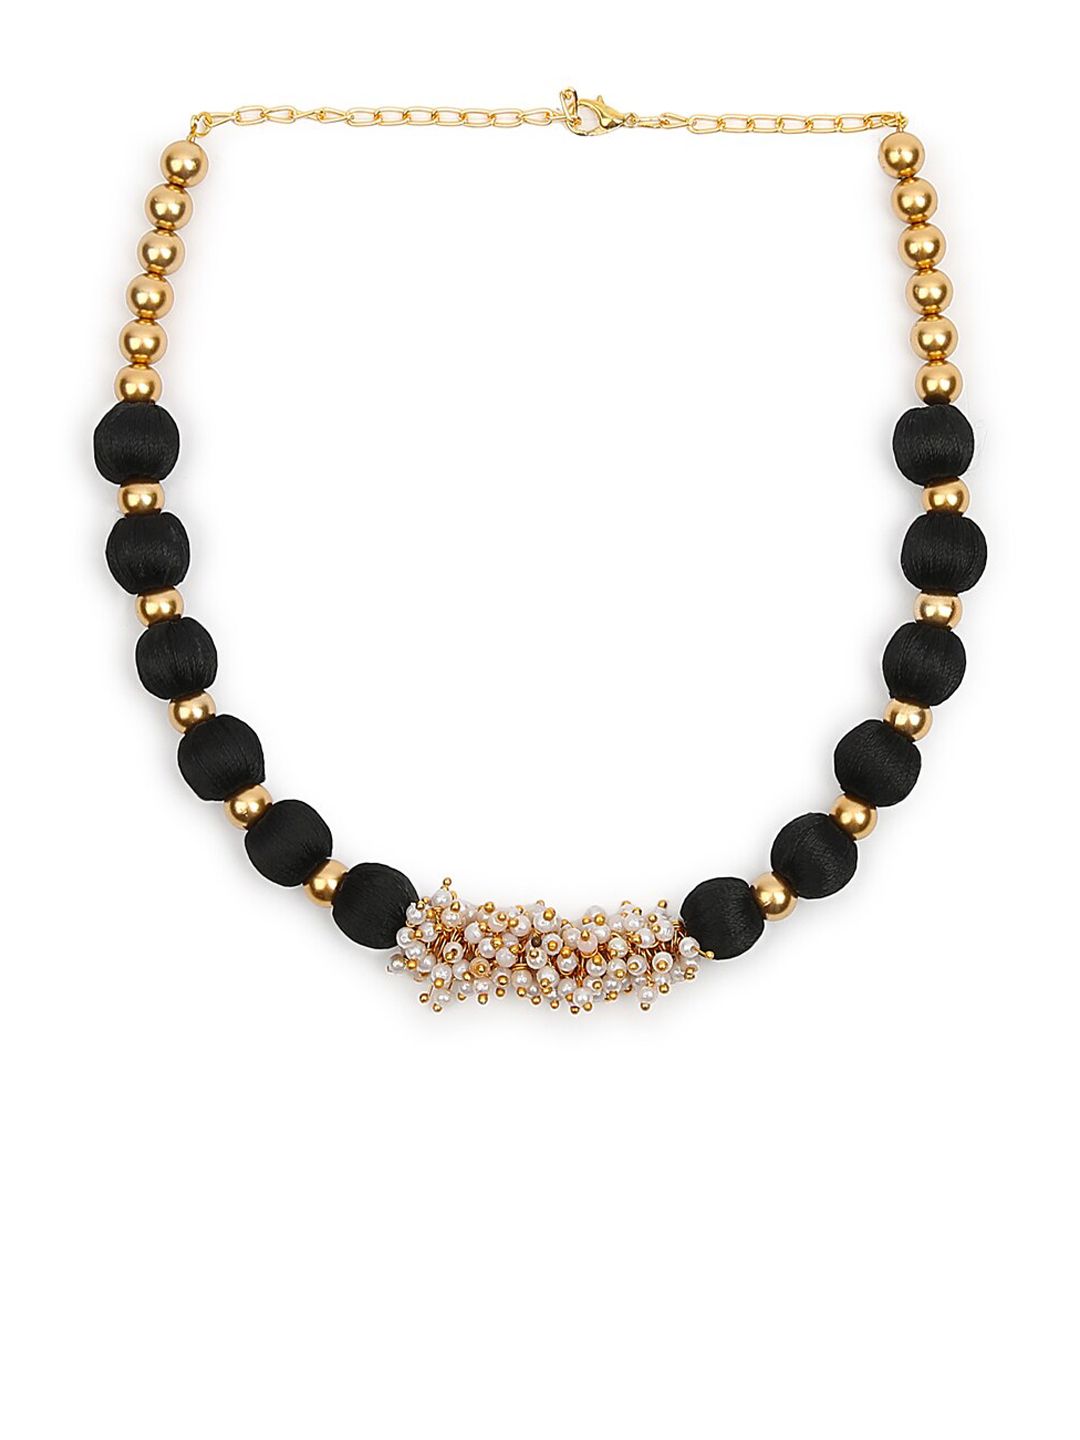 AKSHARA Gold-Colored & Black Beaded Handcrafted Choker Necklace Price in India